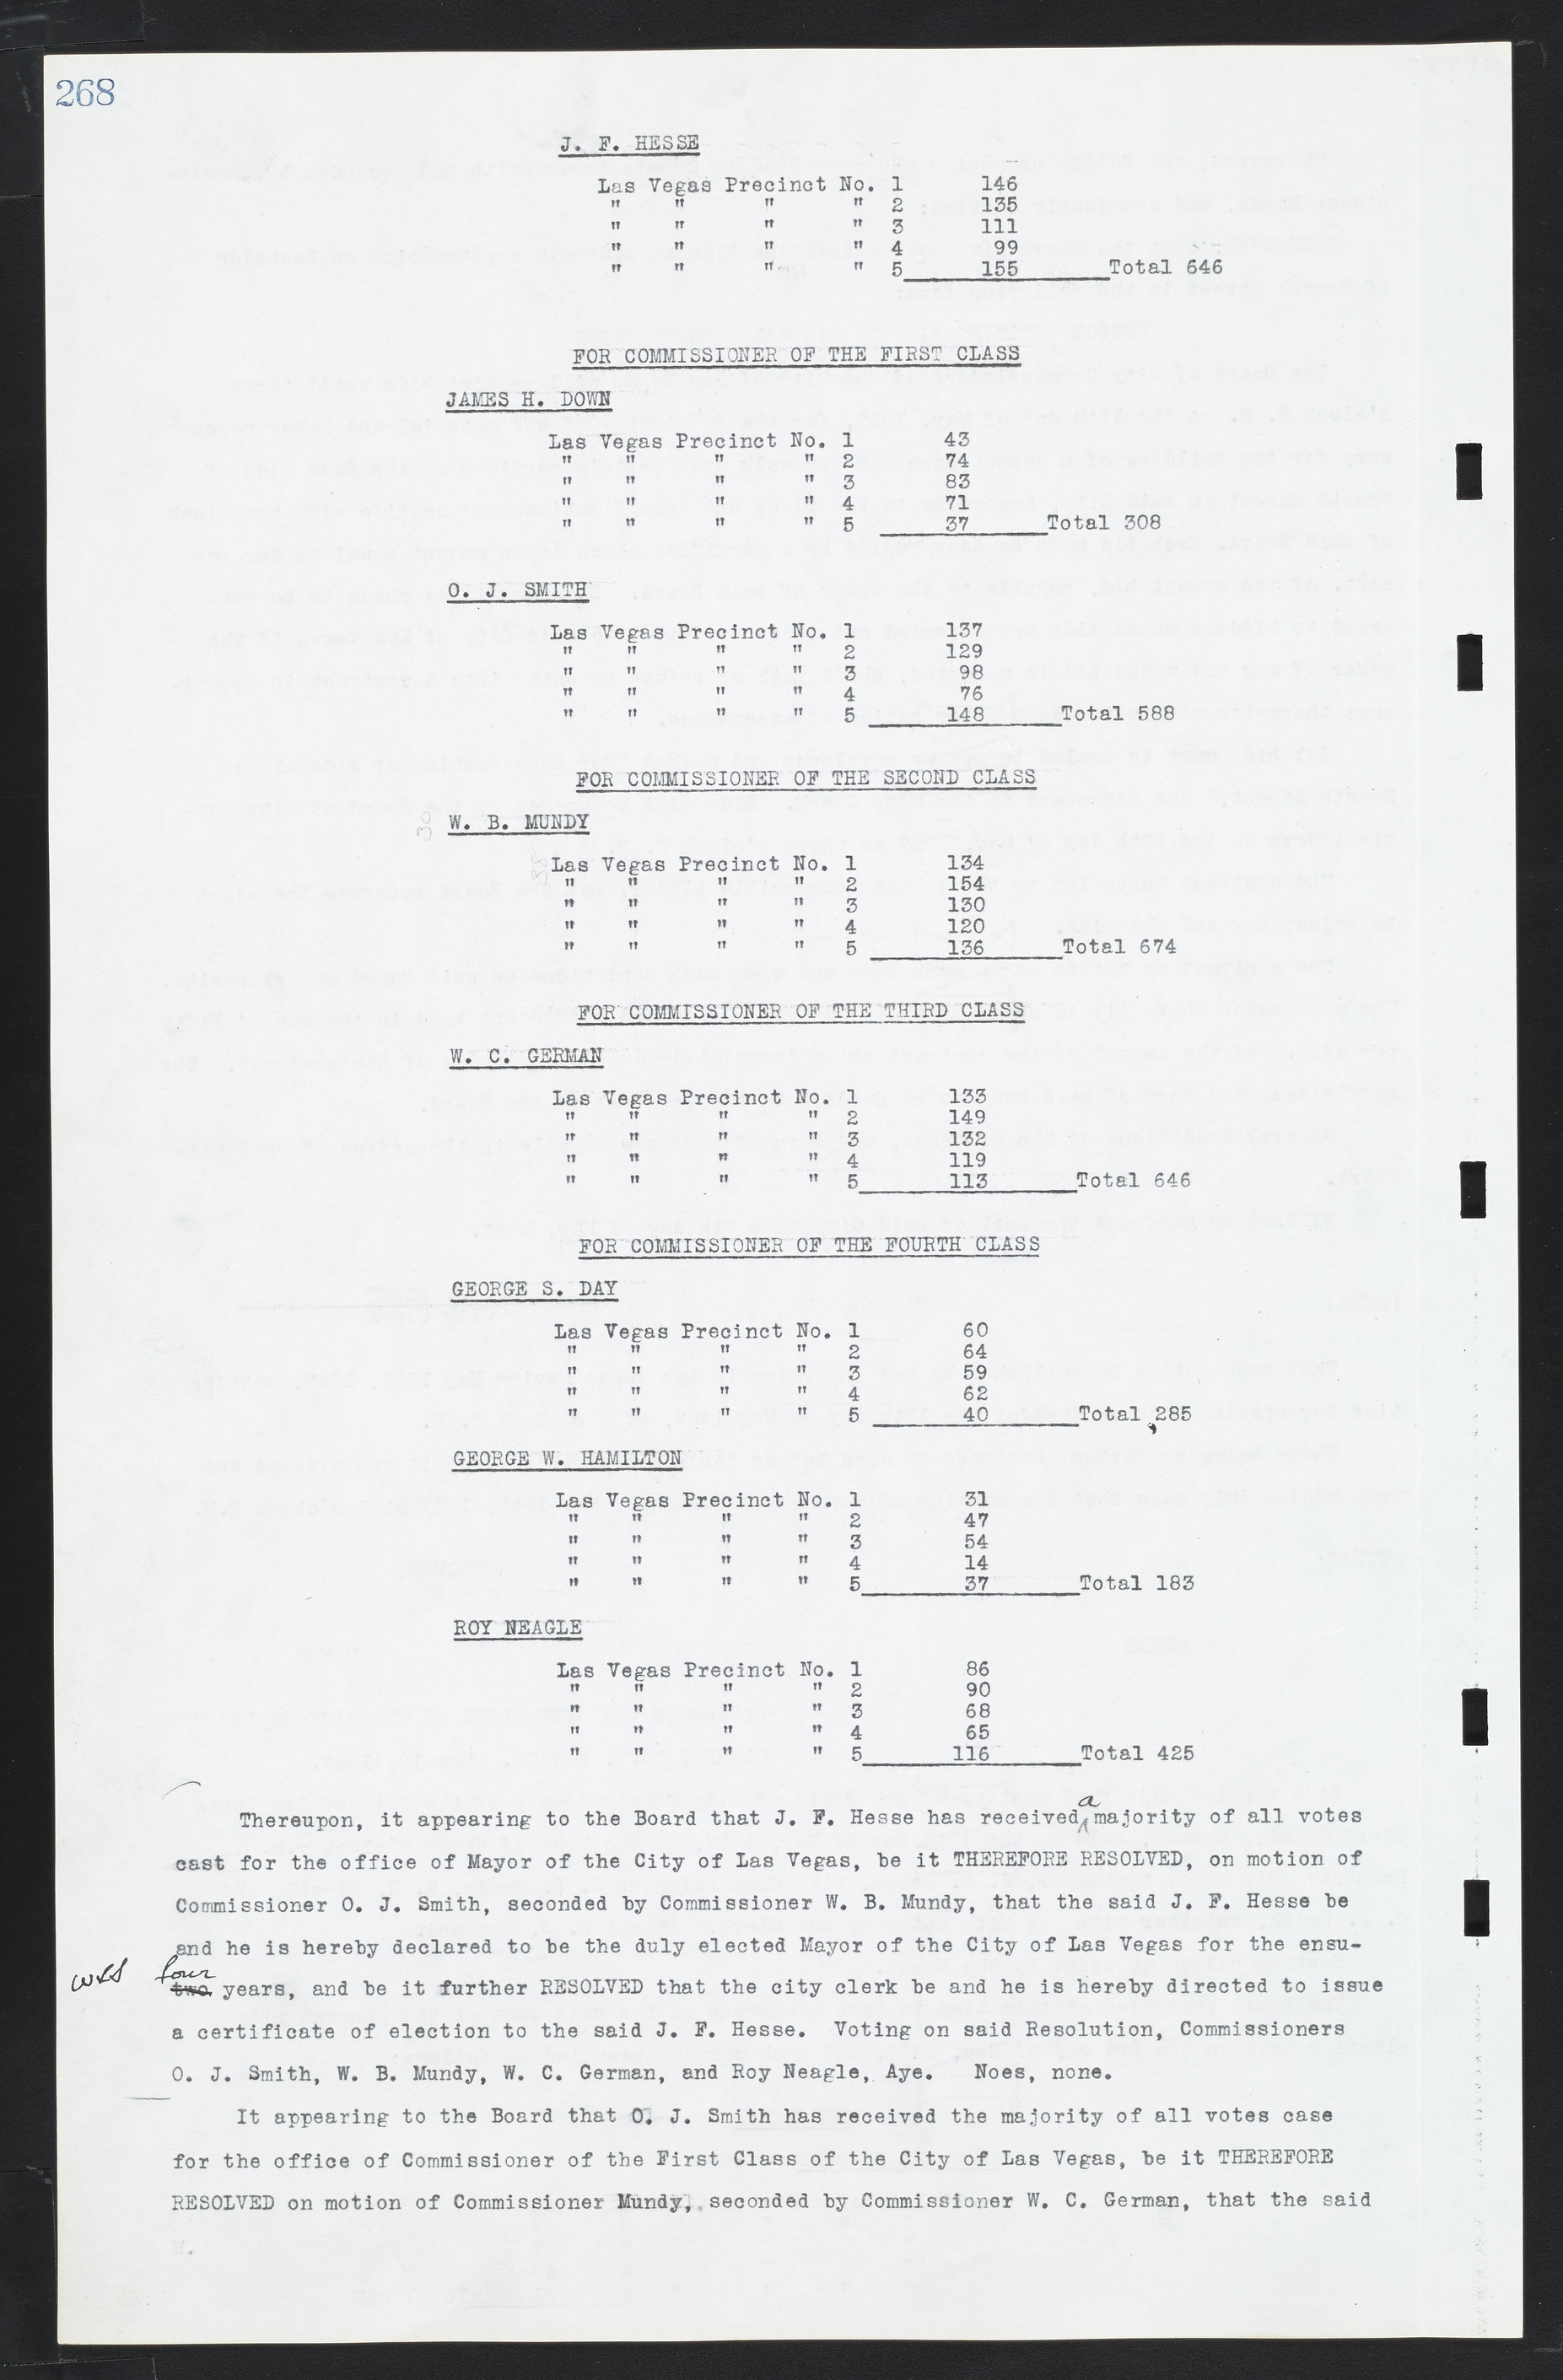 Las Vegas City Commission Minutes, March 1, 1922 to May 10, 1929, lvc000002-277